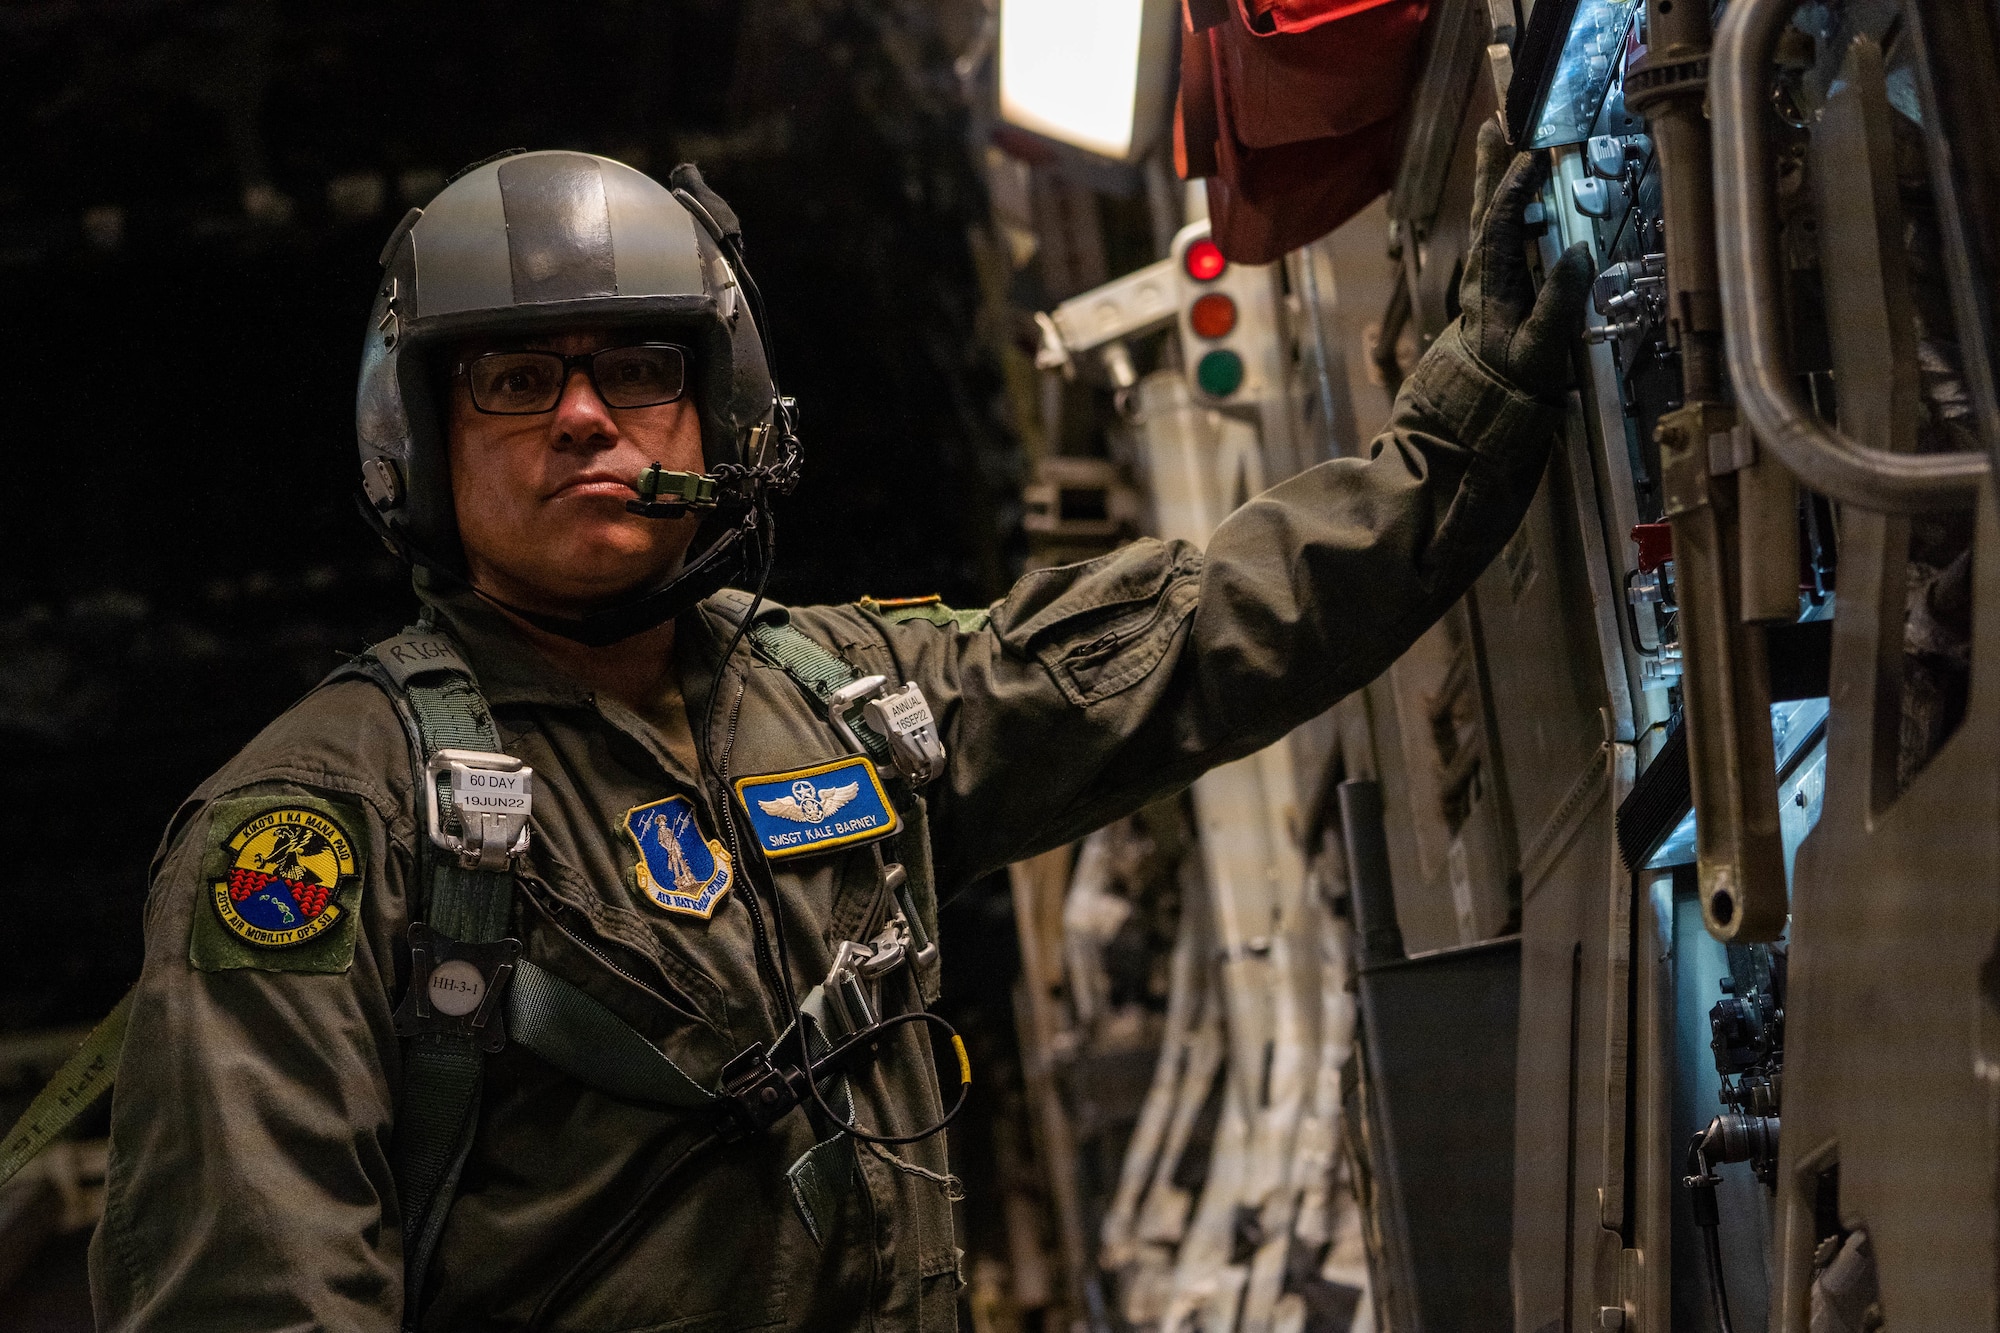 U.S. Air Force Senior Master Sgt. Kale Barney, 201st Air Mobility Operations Squadron loadmaster, prepares to walk out to the ramp of a C-17 Globemaster III during Exercise Global Dexterity 2022 at Joint Base Pearl Harbor-Hickam, Hawaii, May 4, 2022. Exercise Global Dexterity 2022 is designed to help develop the bilateral tactical airlift and airdrop capabilities of the U.S. Air Force and the Royal Australian Air Force. (U.S. Air Force photo by Airman 1st Class Makensie Cooper)